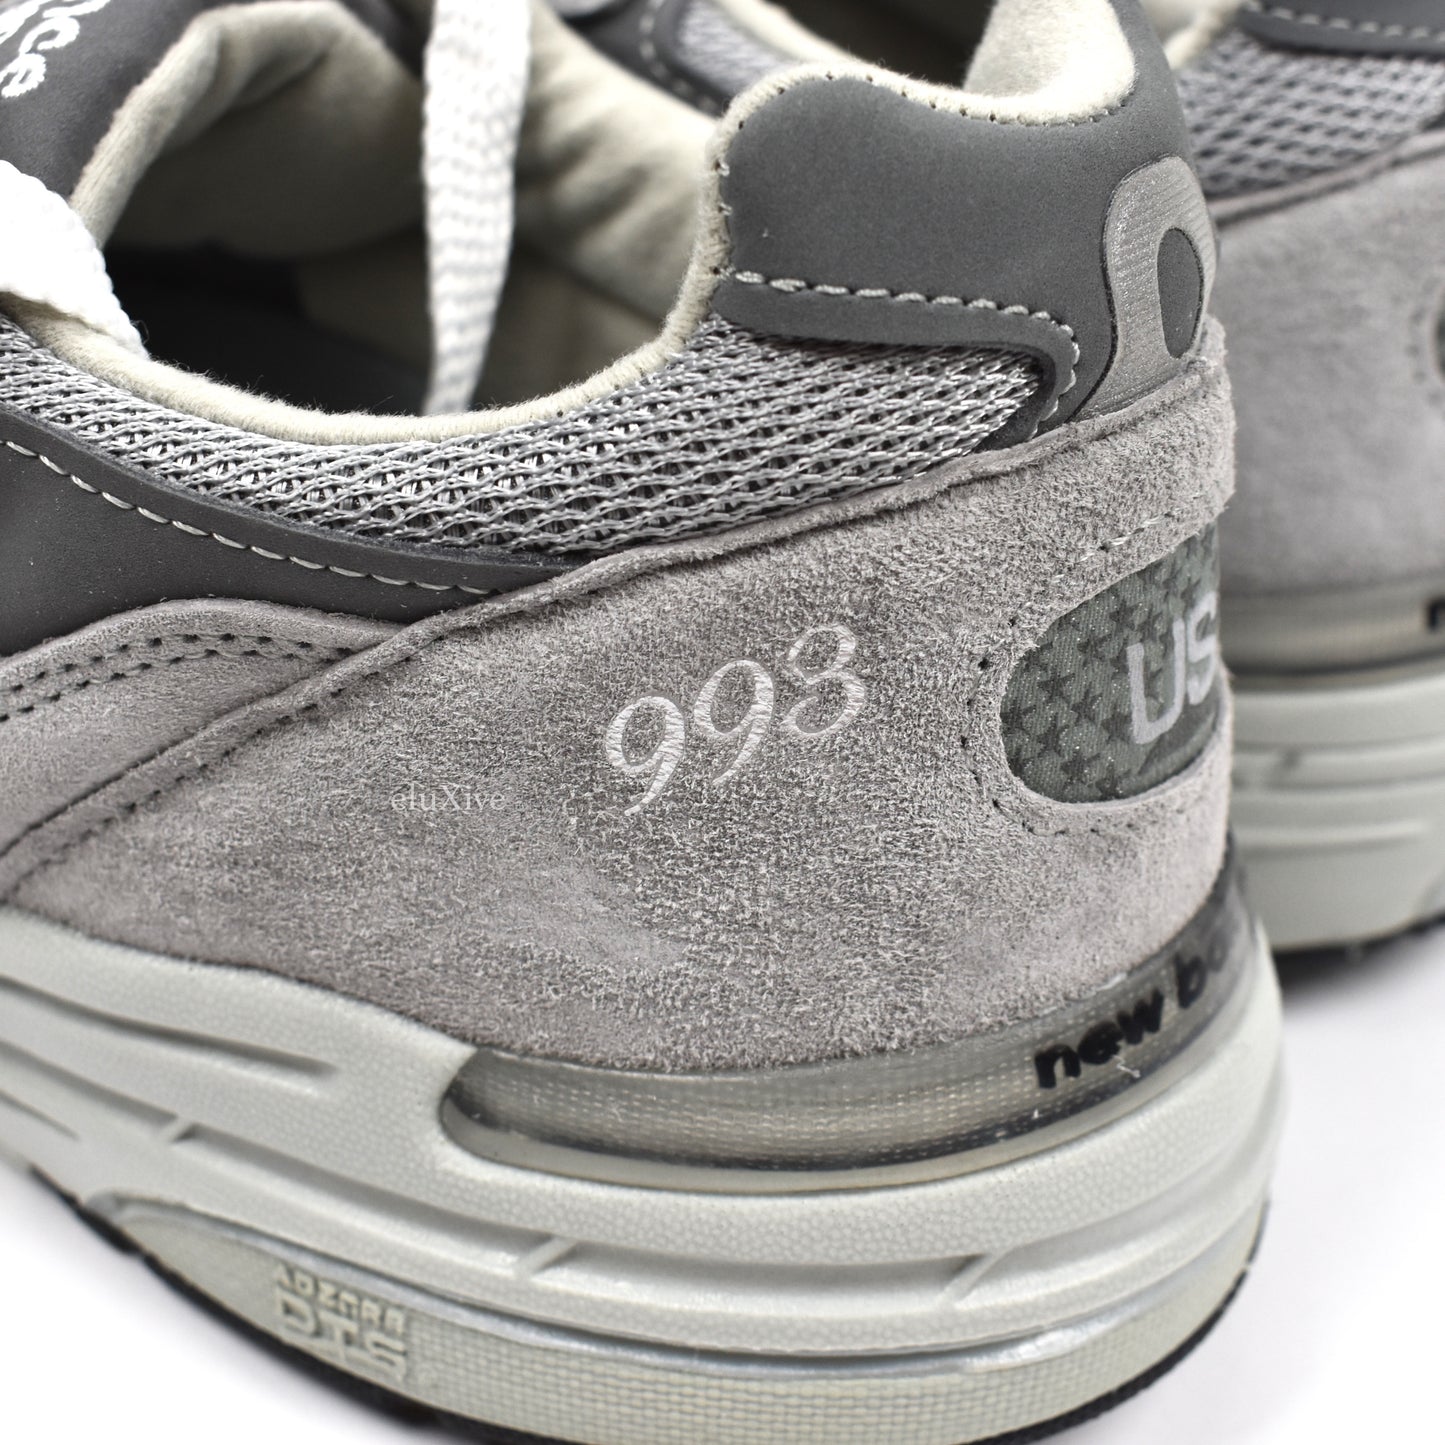 New Balance - Made in USA 993 Sneakers (Gray)